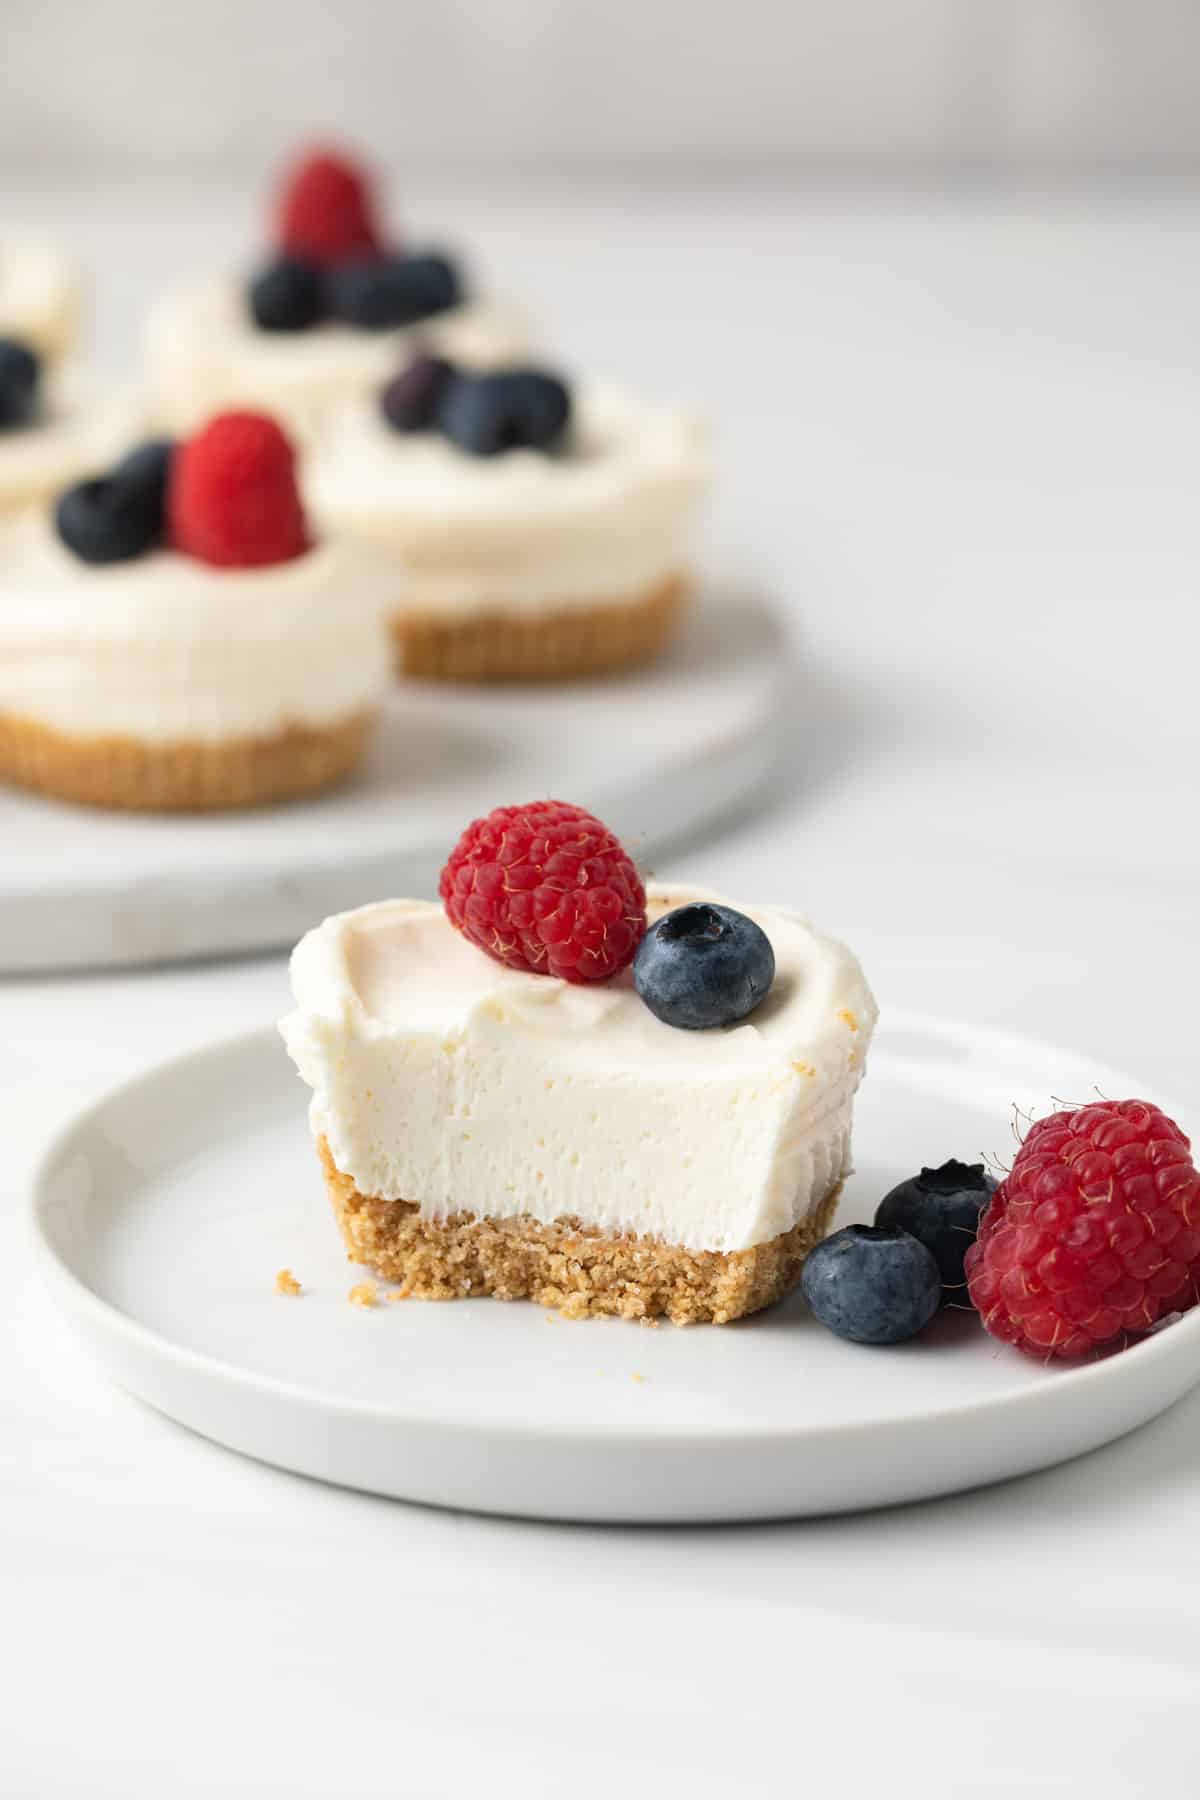 No bake mini cheesecake on plate with a bite missing.